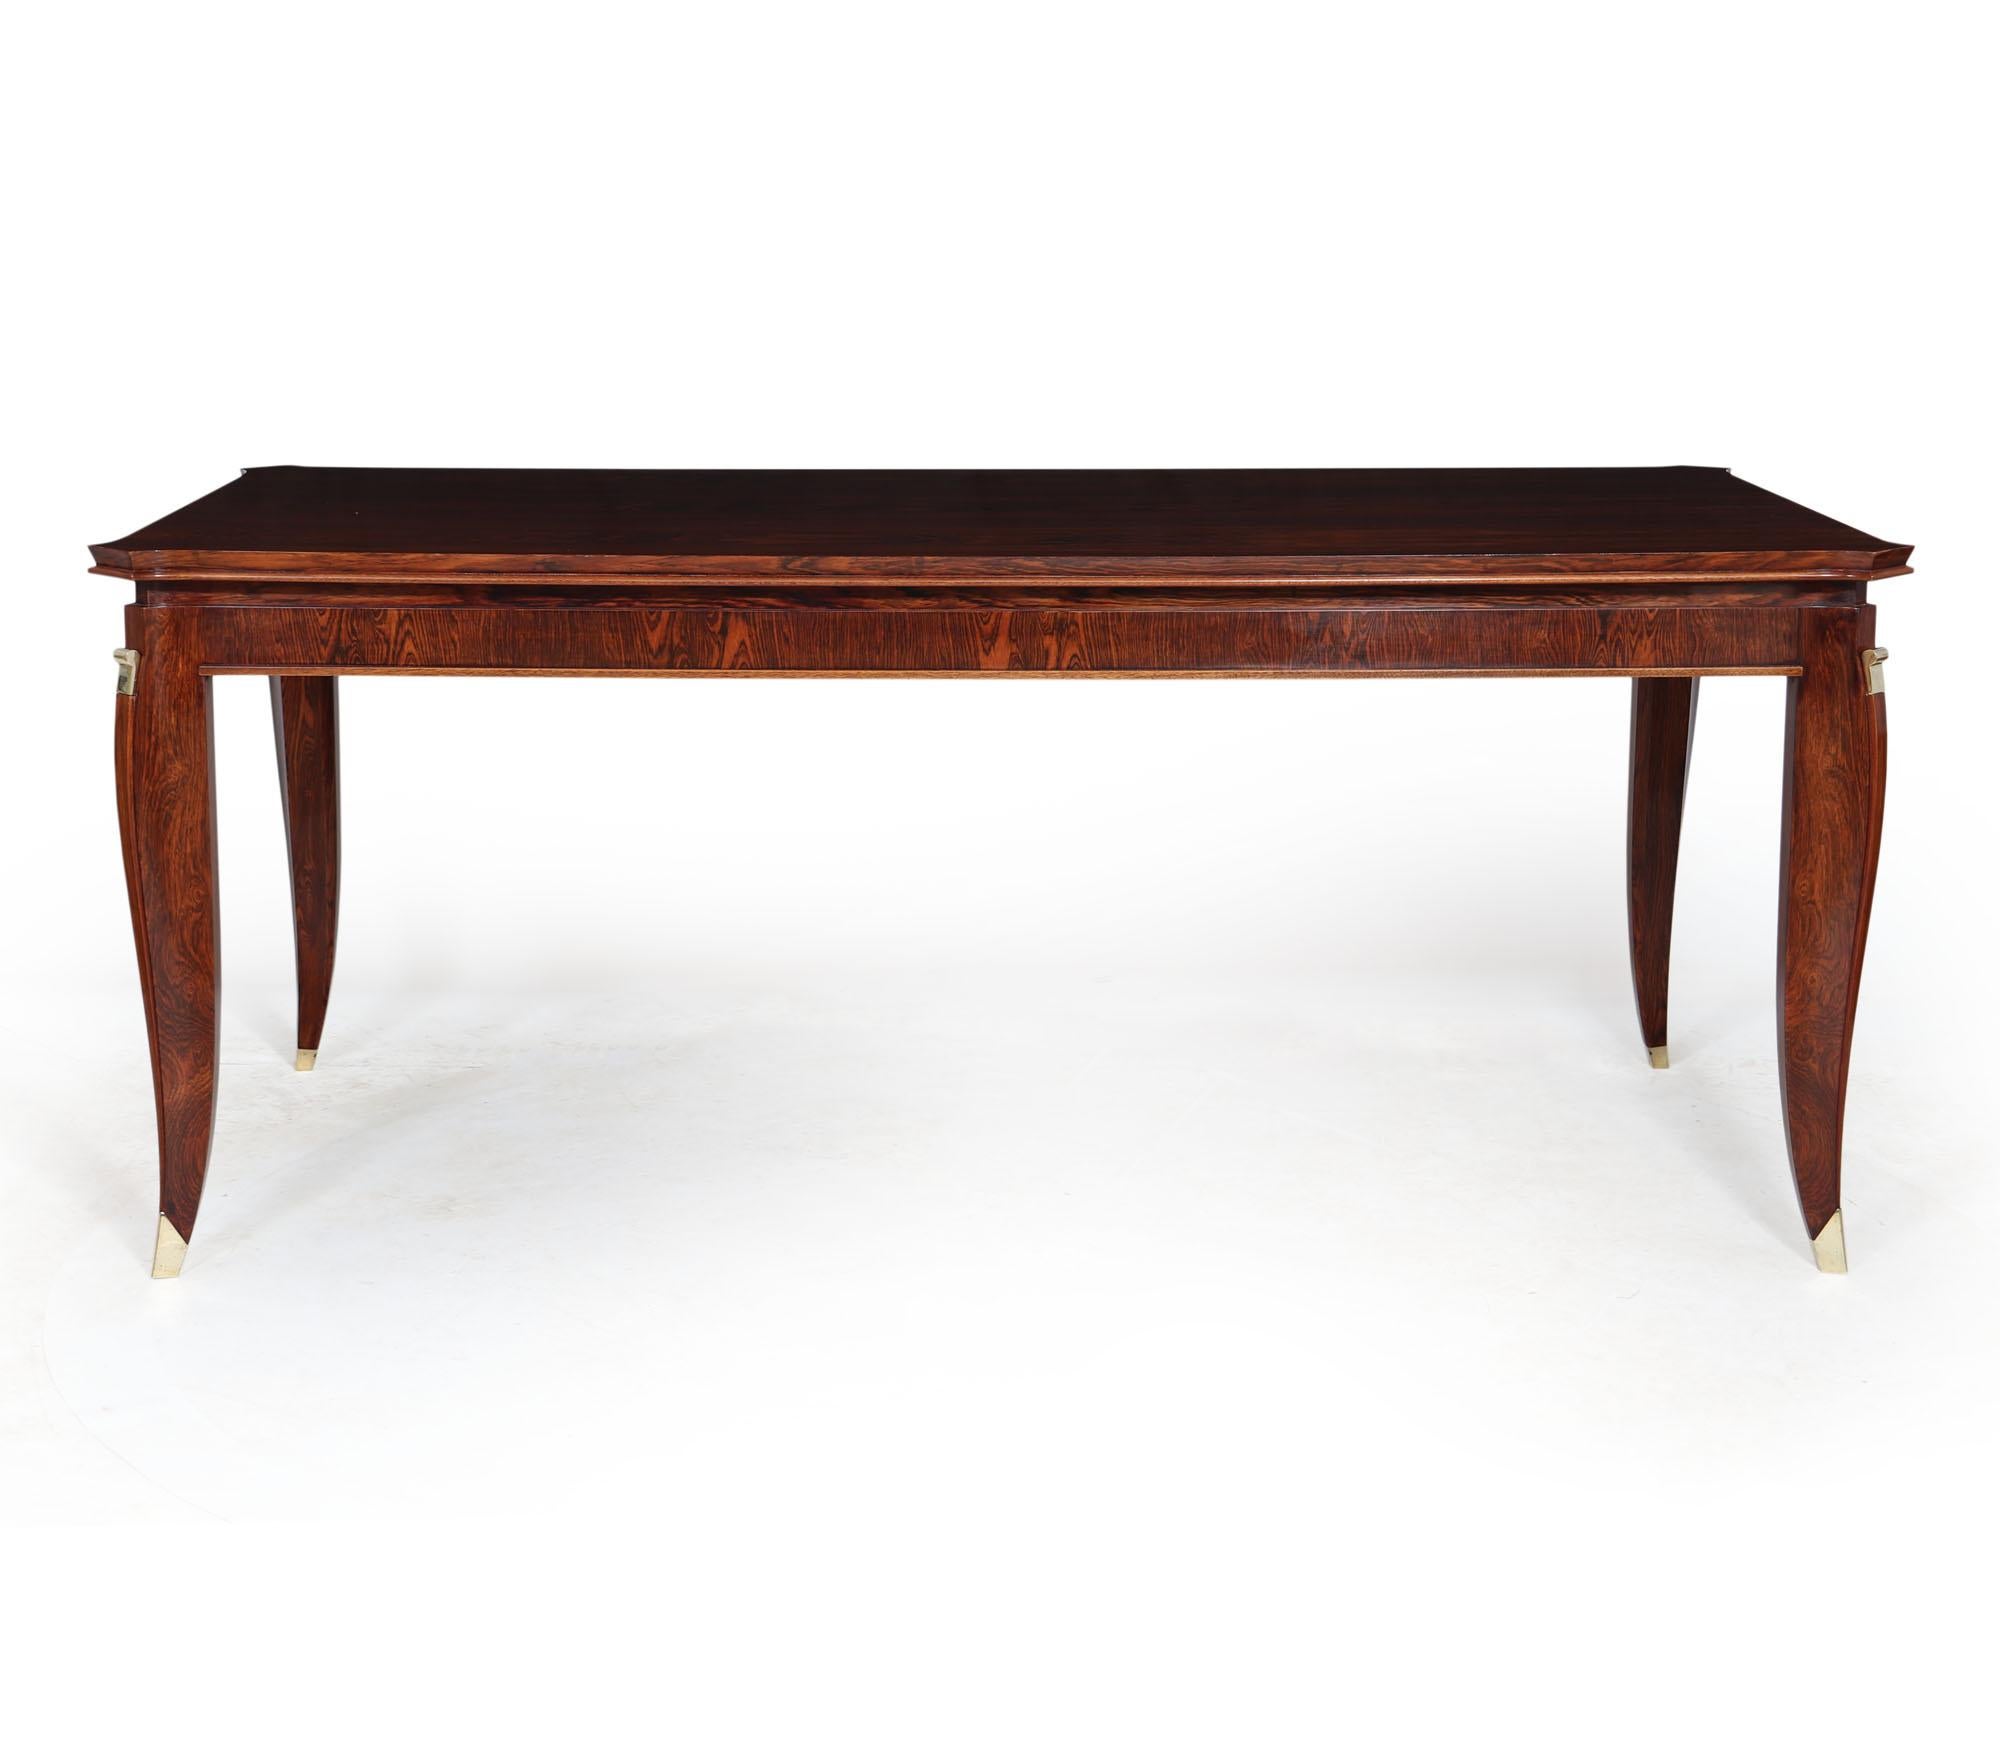 Early 20th Century French Art Deco Dining Table by Maurice Rinck